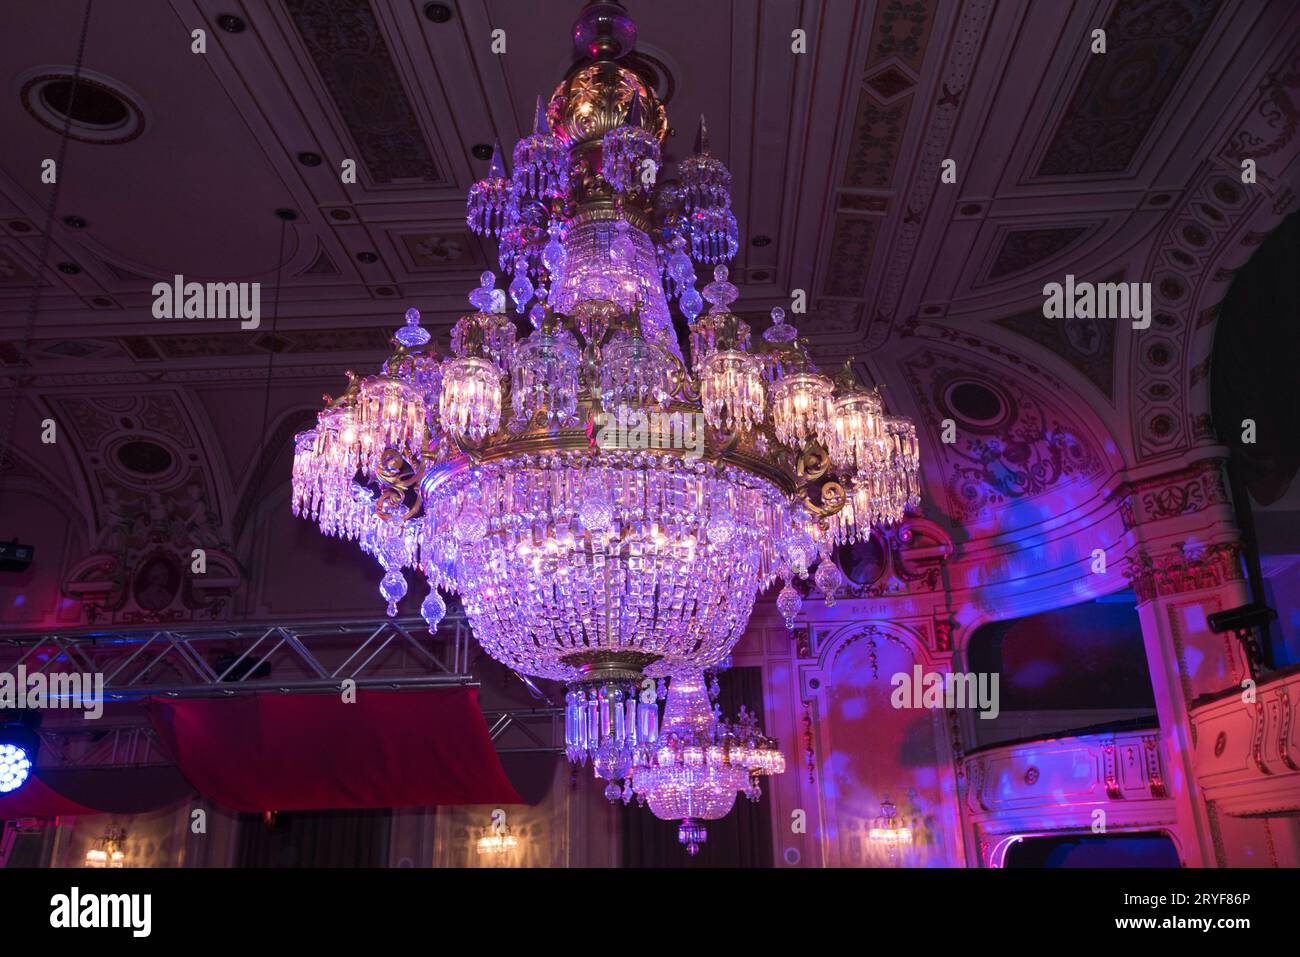 Crystal chandelier in interior lighting and light design Stock Photo